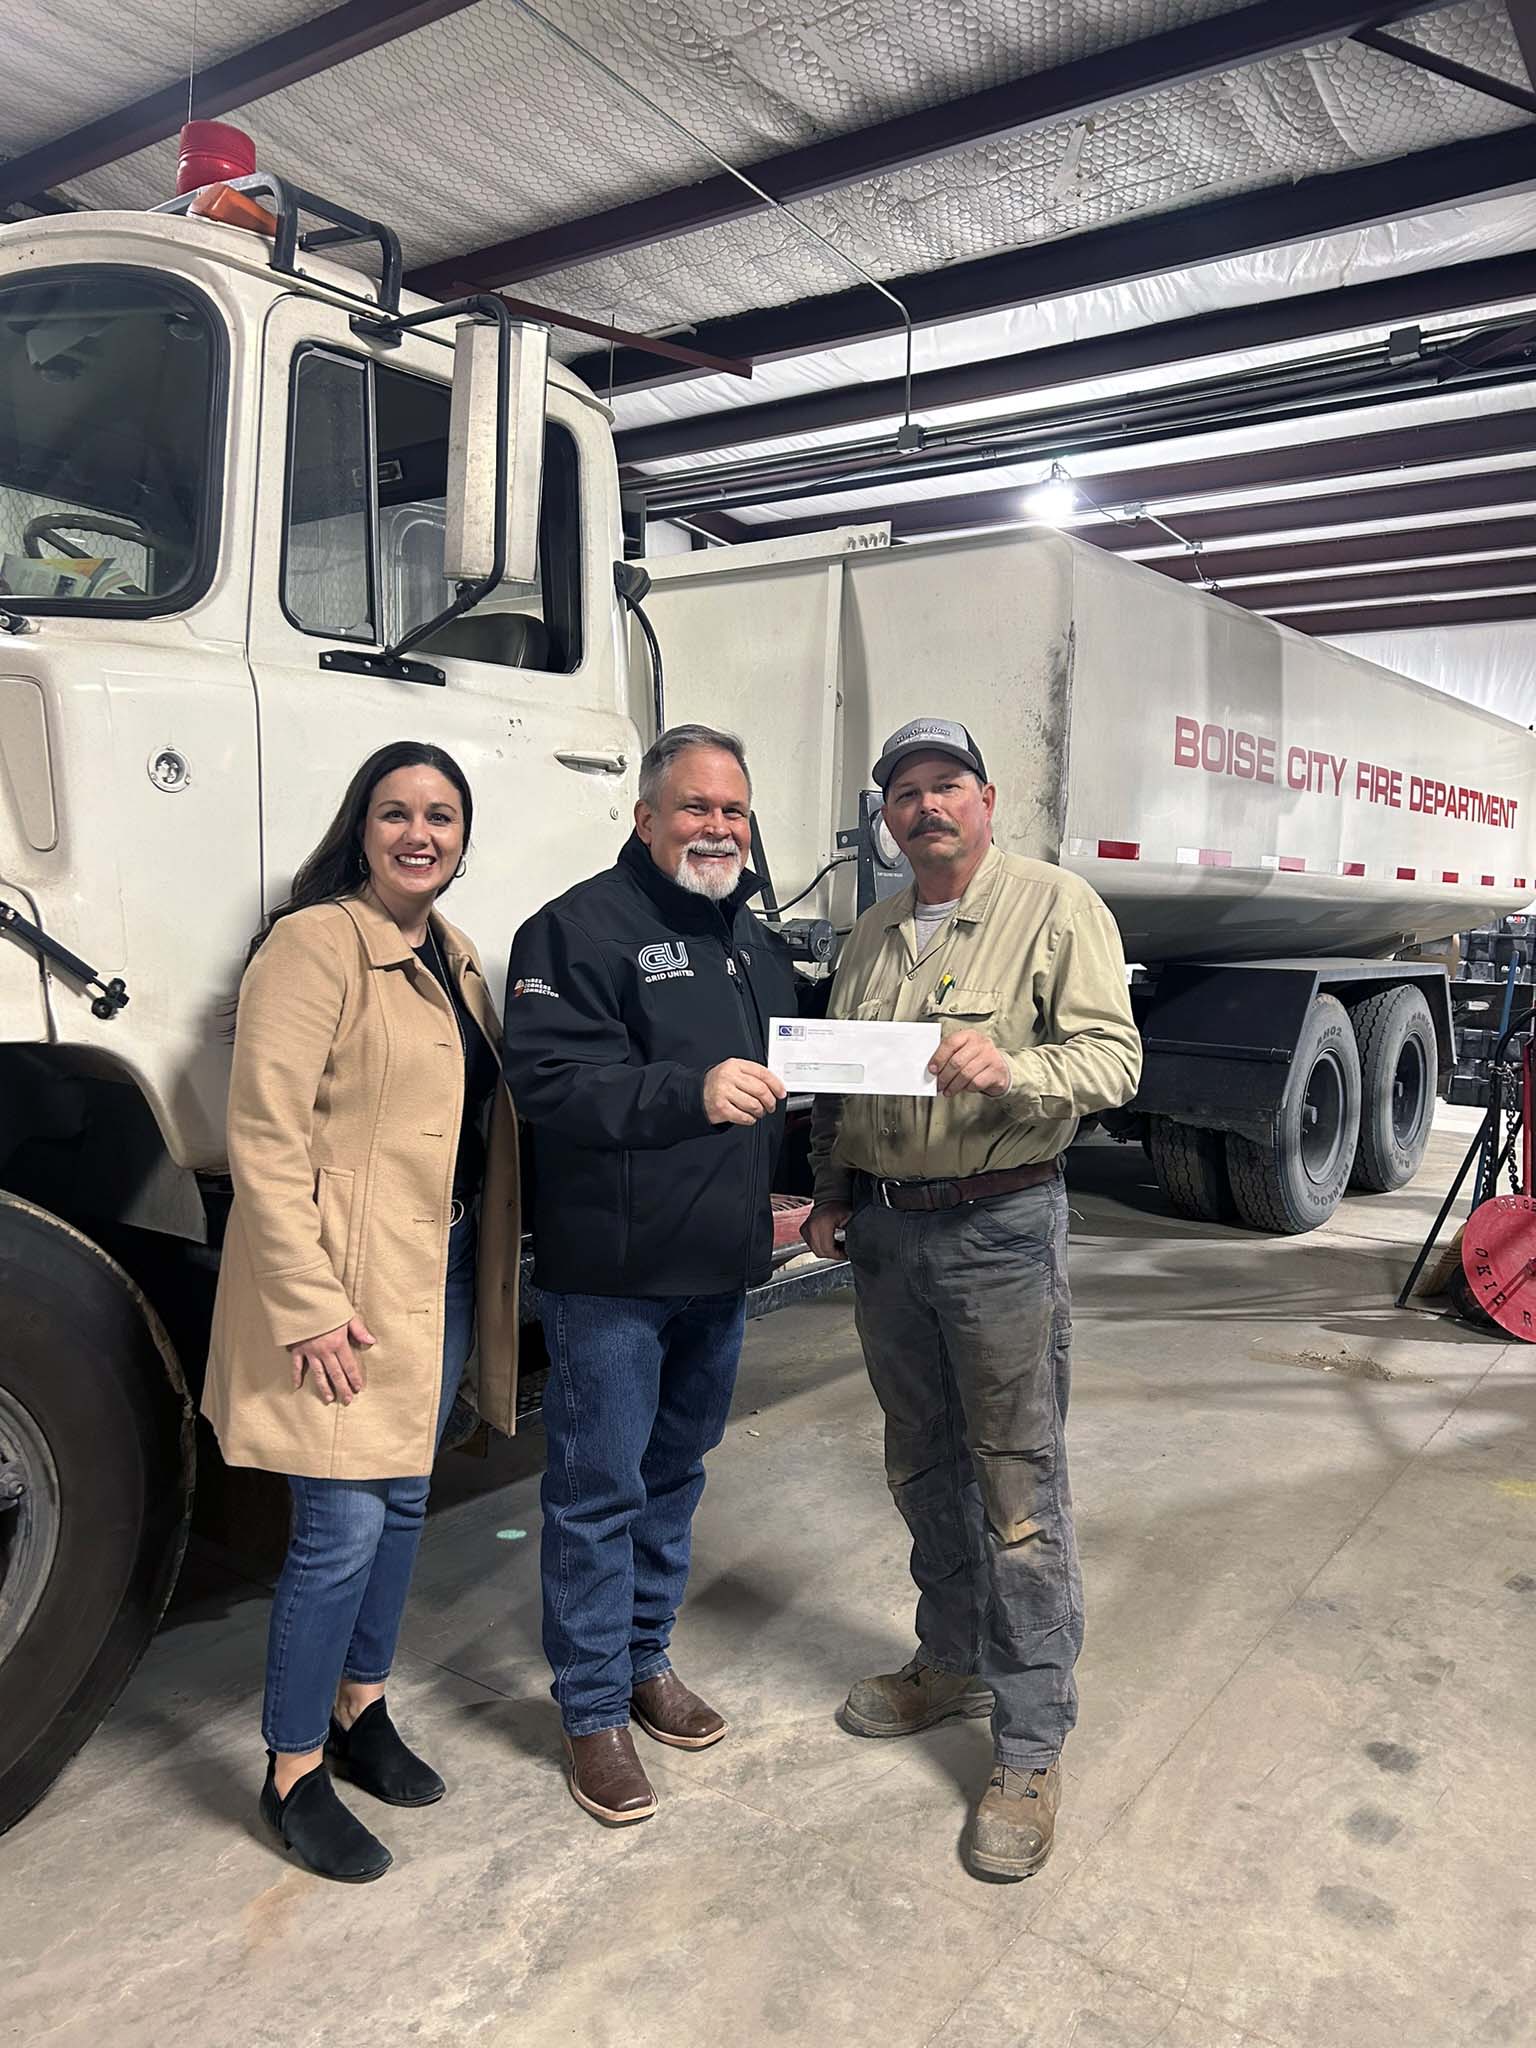 Boise City Fire Department – Pictured left to right – Carrie Sanders, CSCF Executive Director; Alan Manning, Three Corners Connector Project Communications Specialist; presents check to David Odell, Boise City Fire Chief